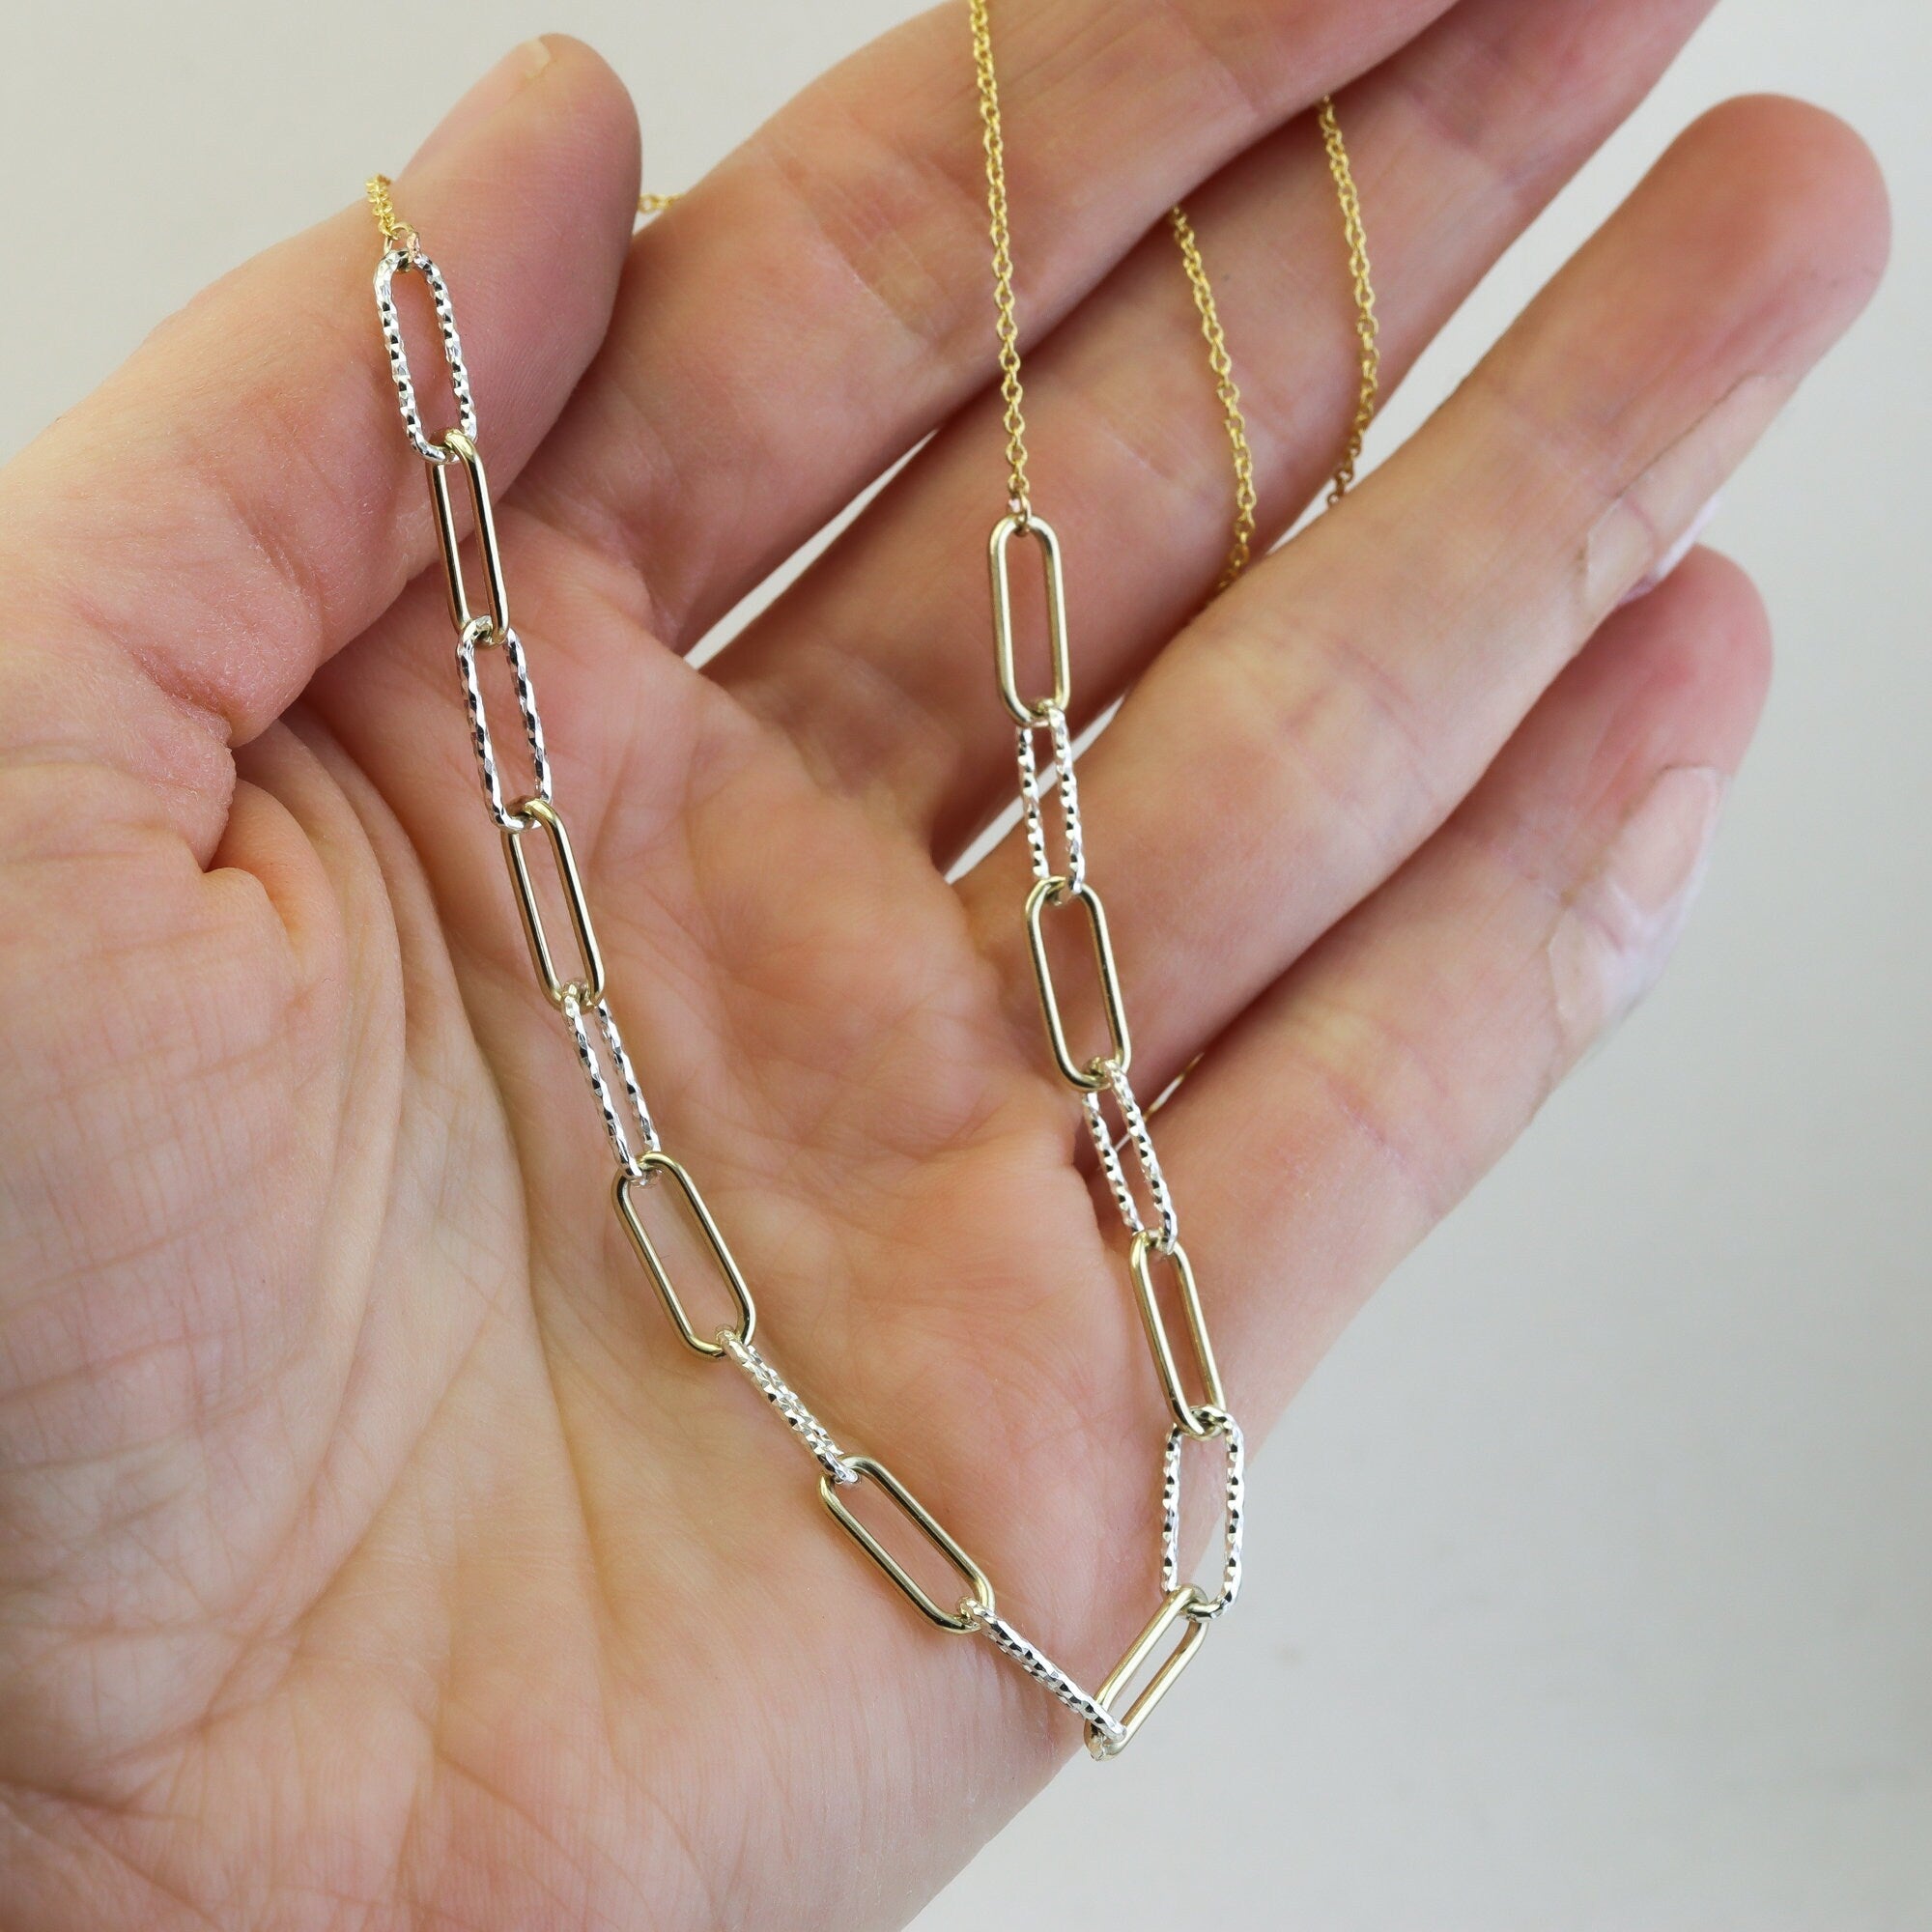 Chunky Paperclip Chain Necklace in Gold Fill and Silver - Mixed Metals Layering Necklace with Sparkle Faceting